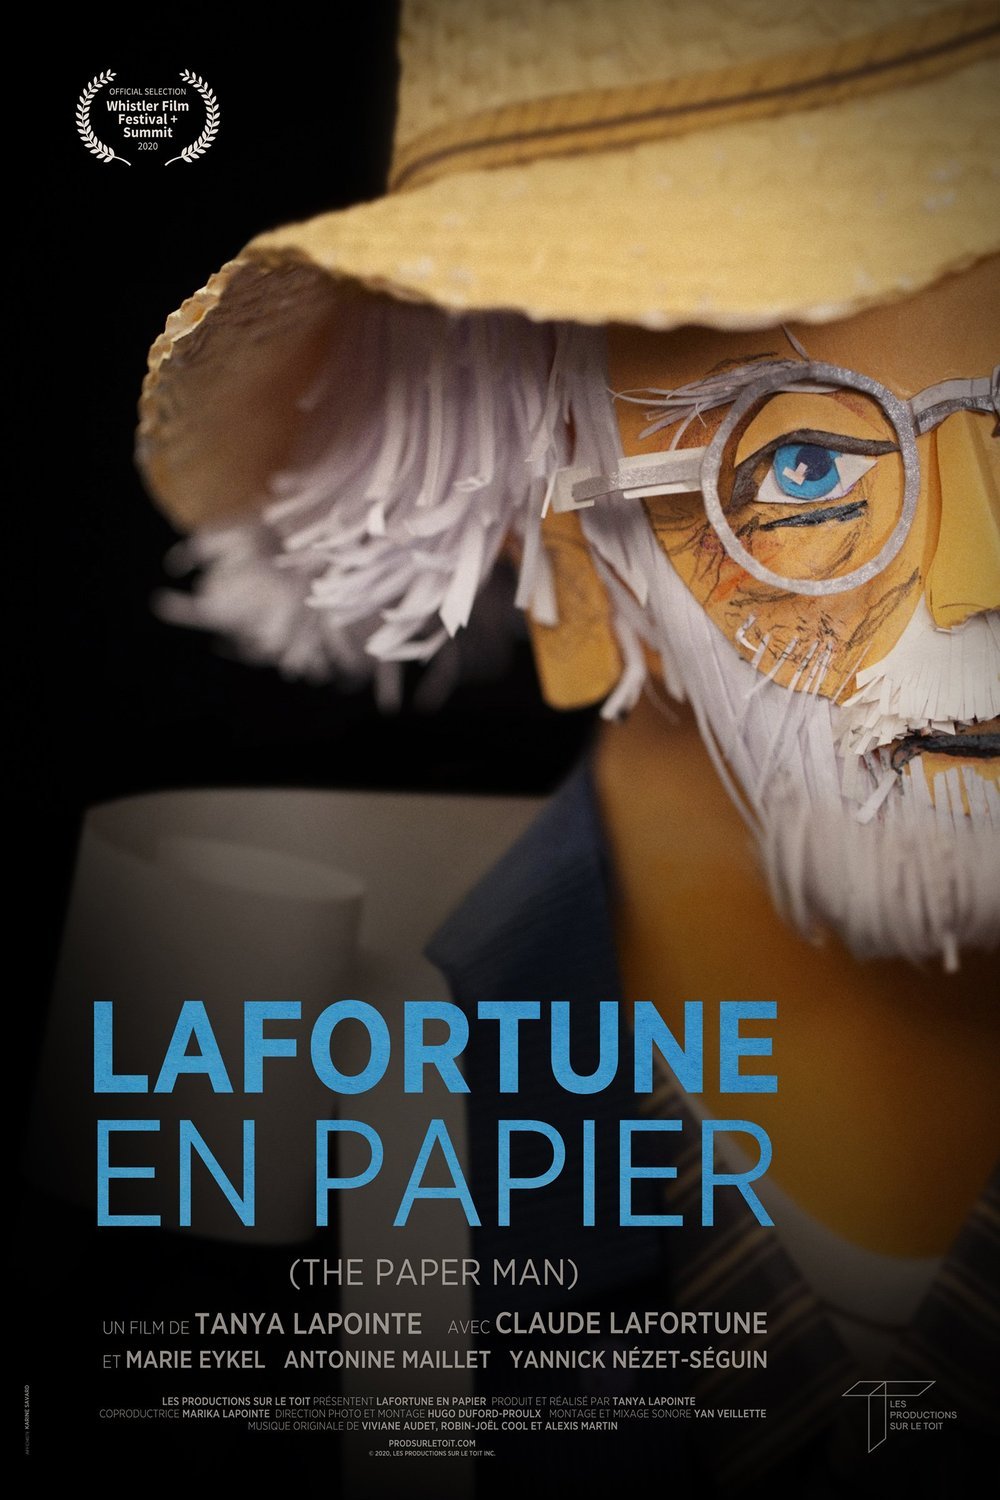 The Paper Man